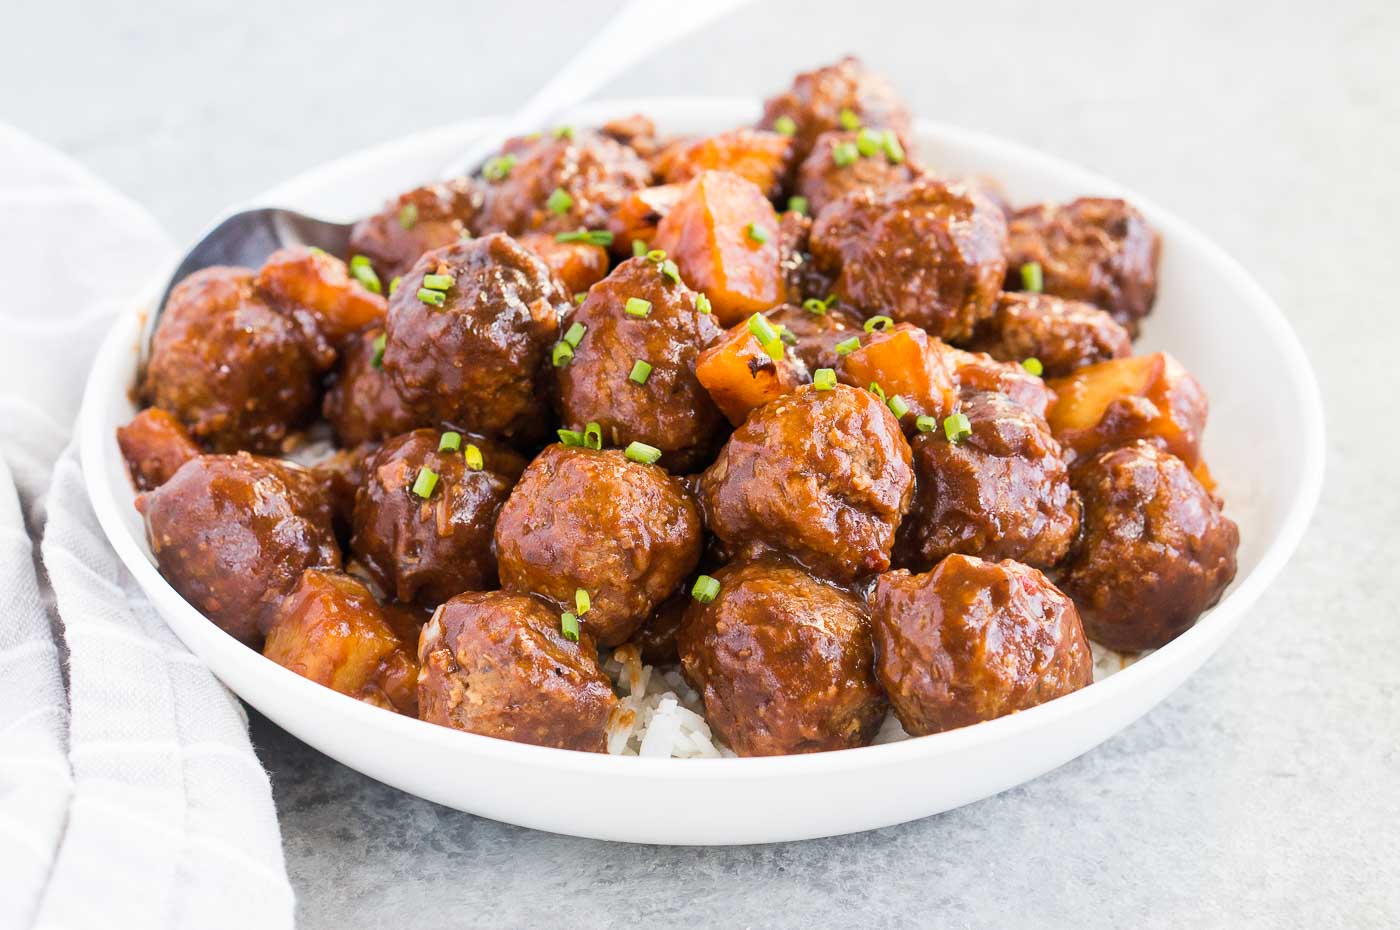 close up image of meatballs and pineapple chunks over rice in a bowl